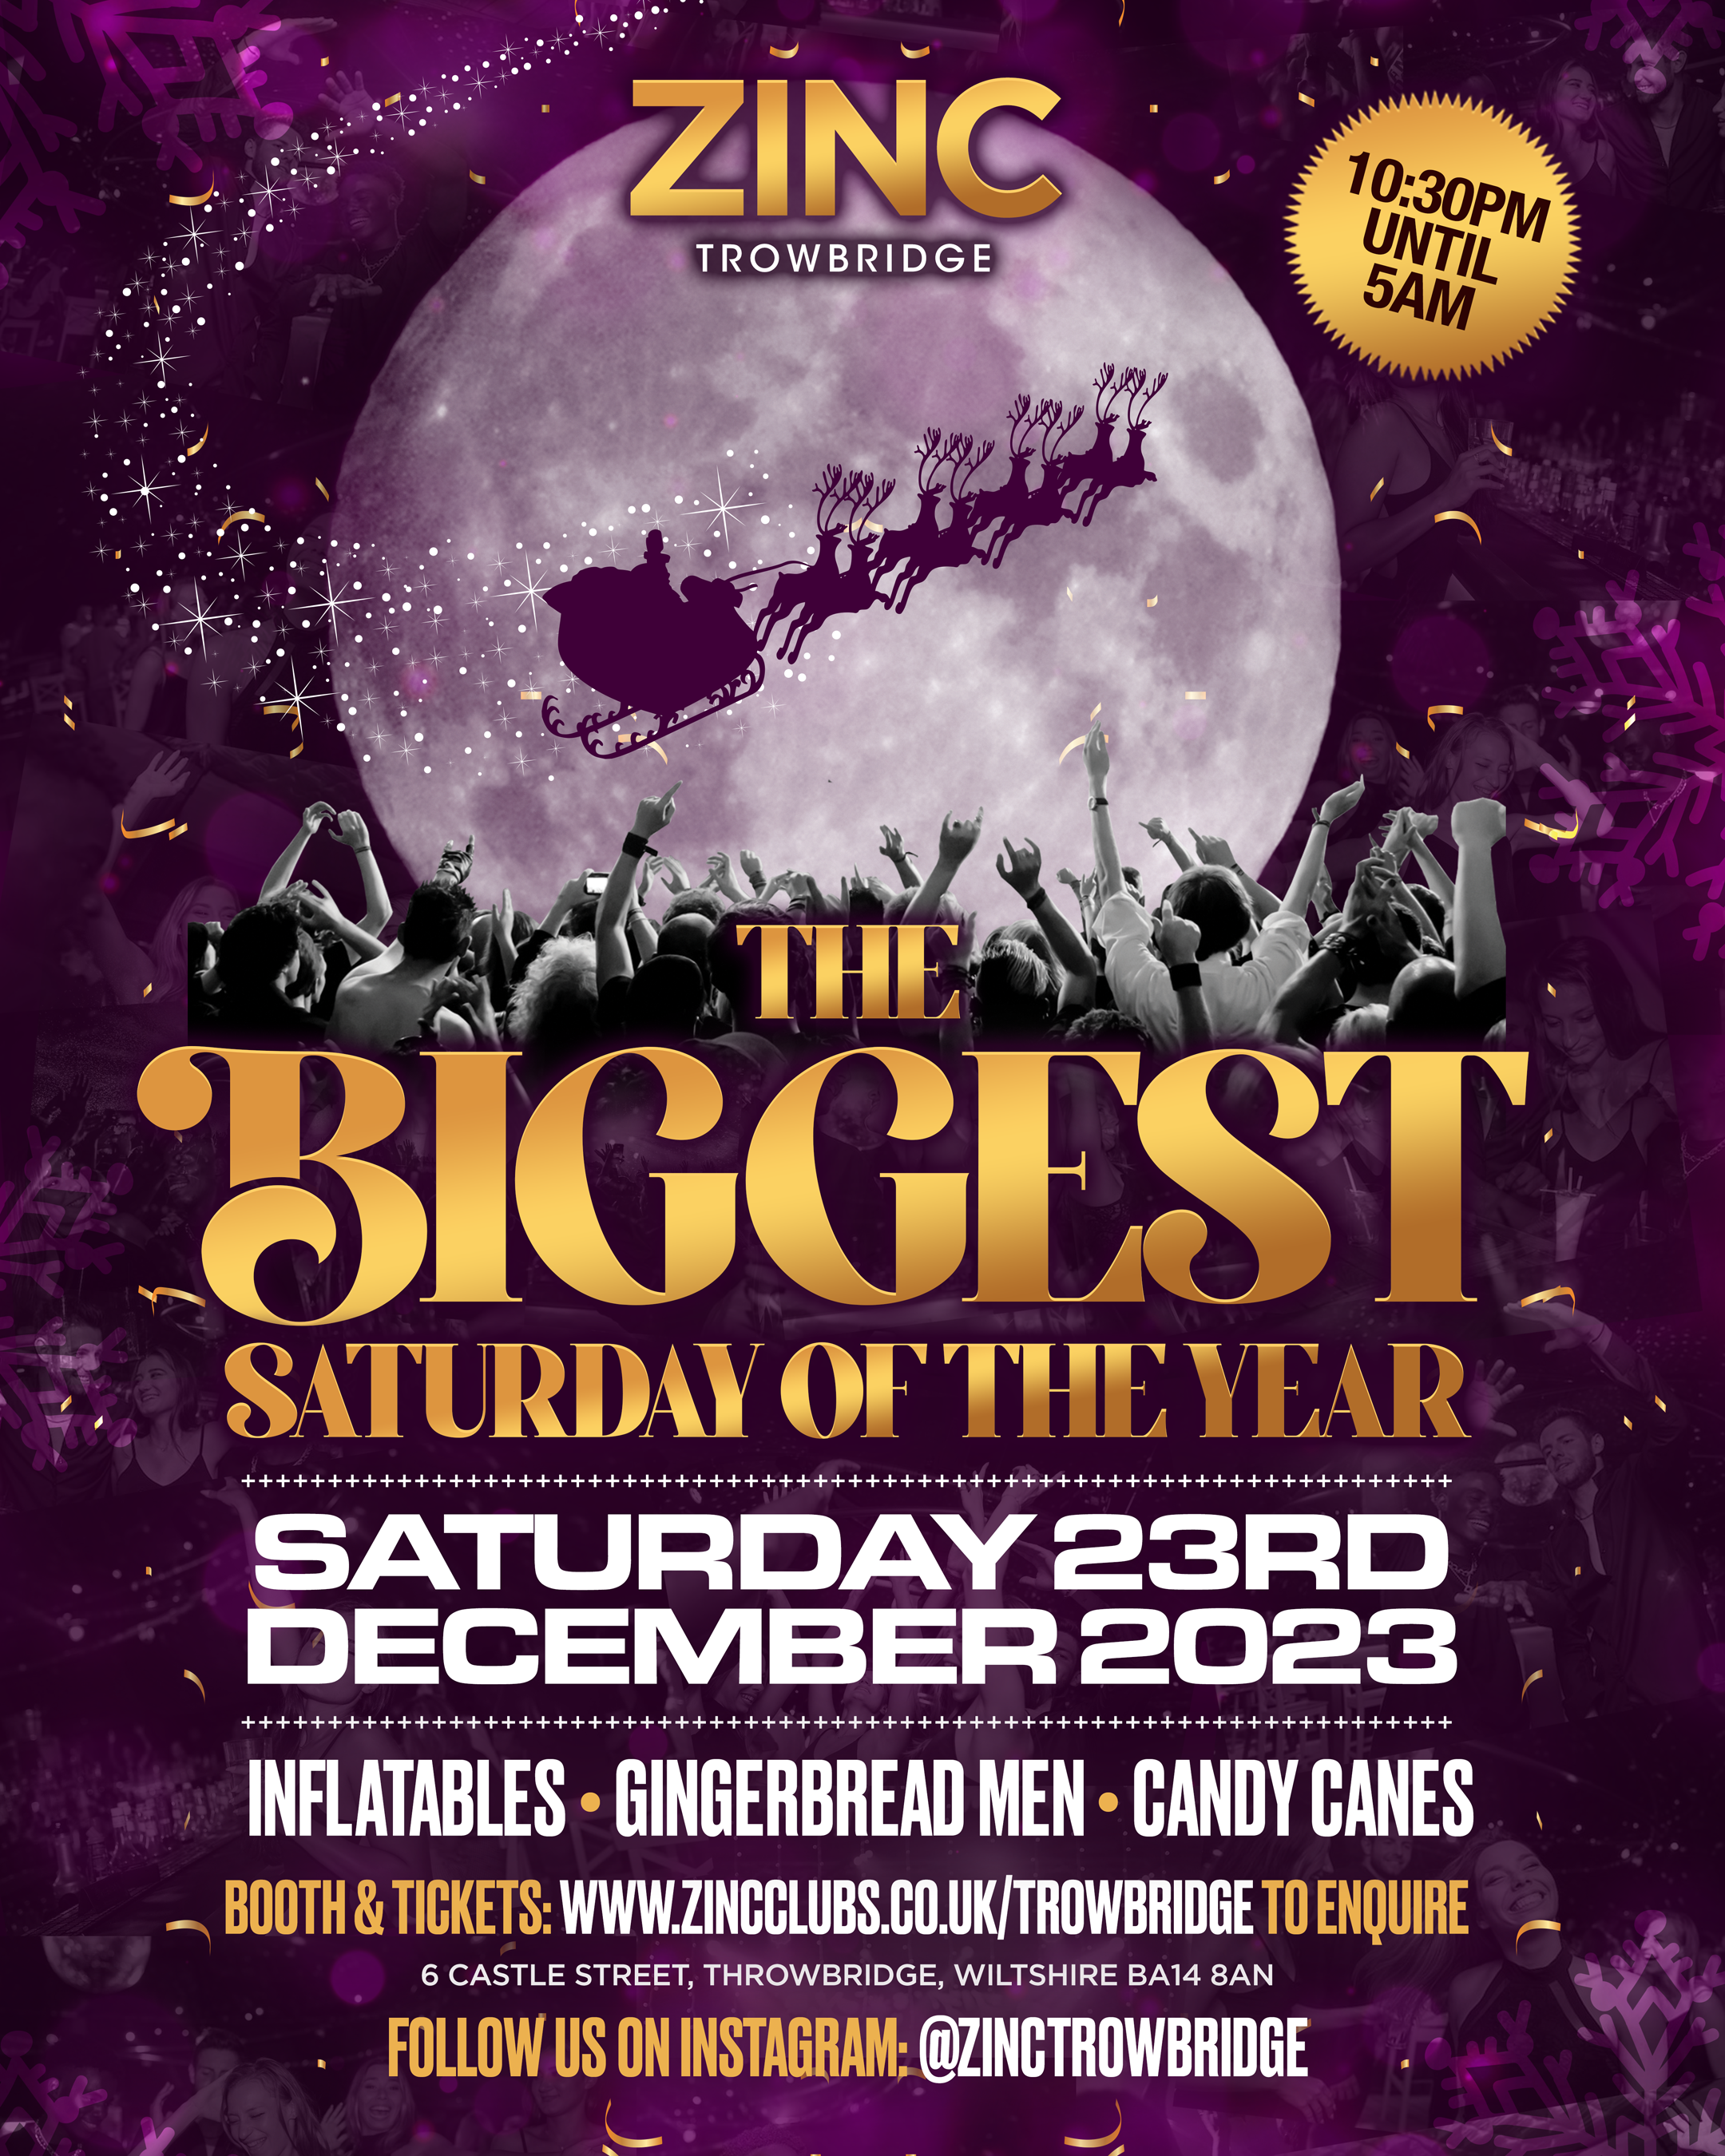 The Biggest Saturday of The year